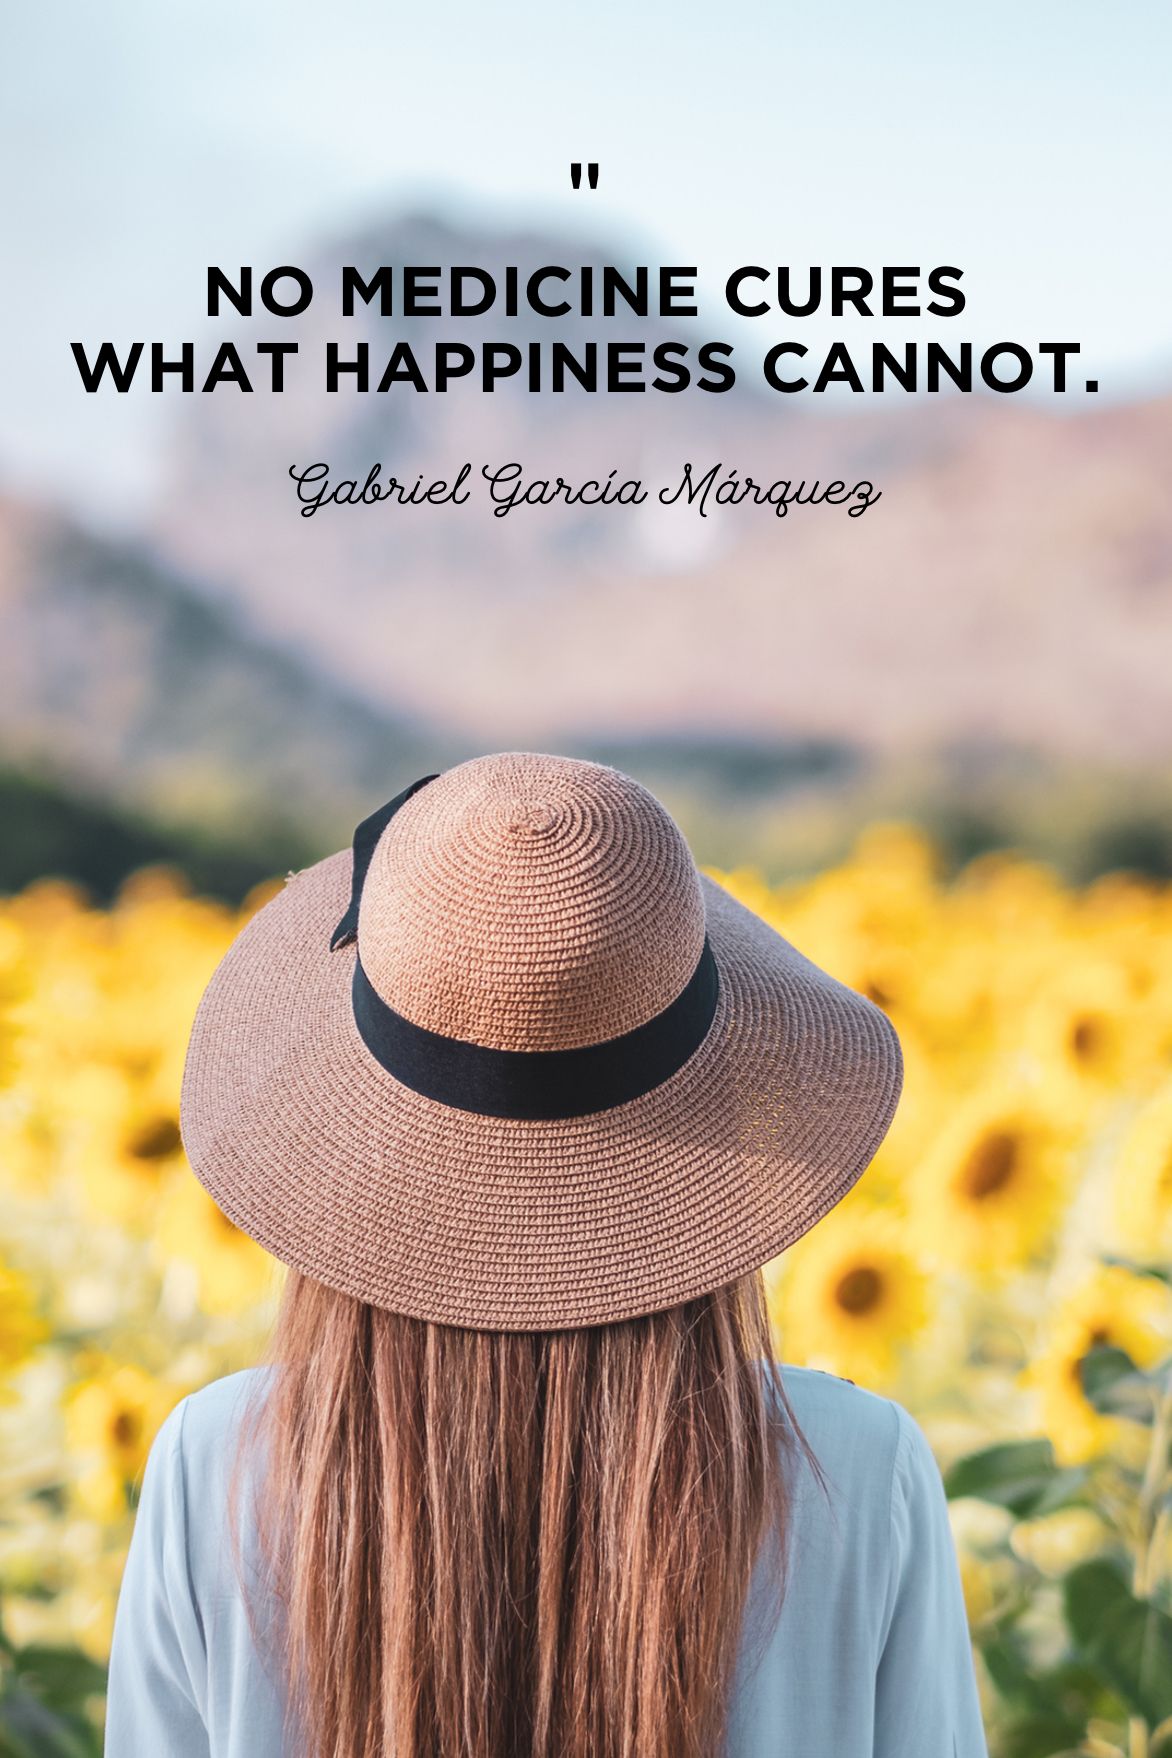 34 Best Happy Quotes Quotes To Make You Happy